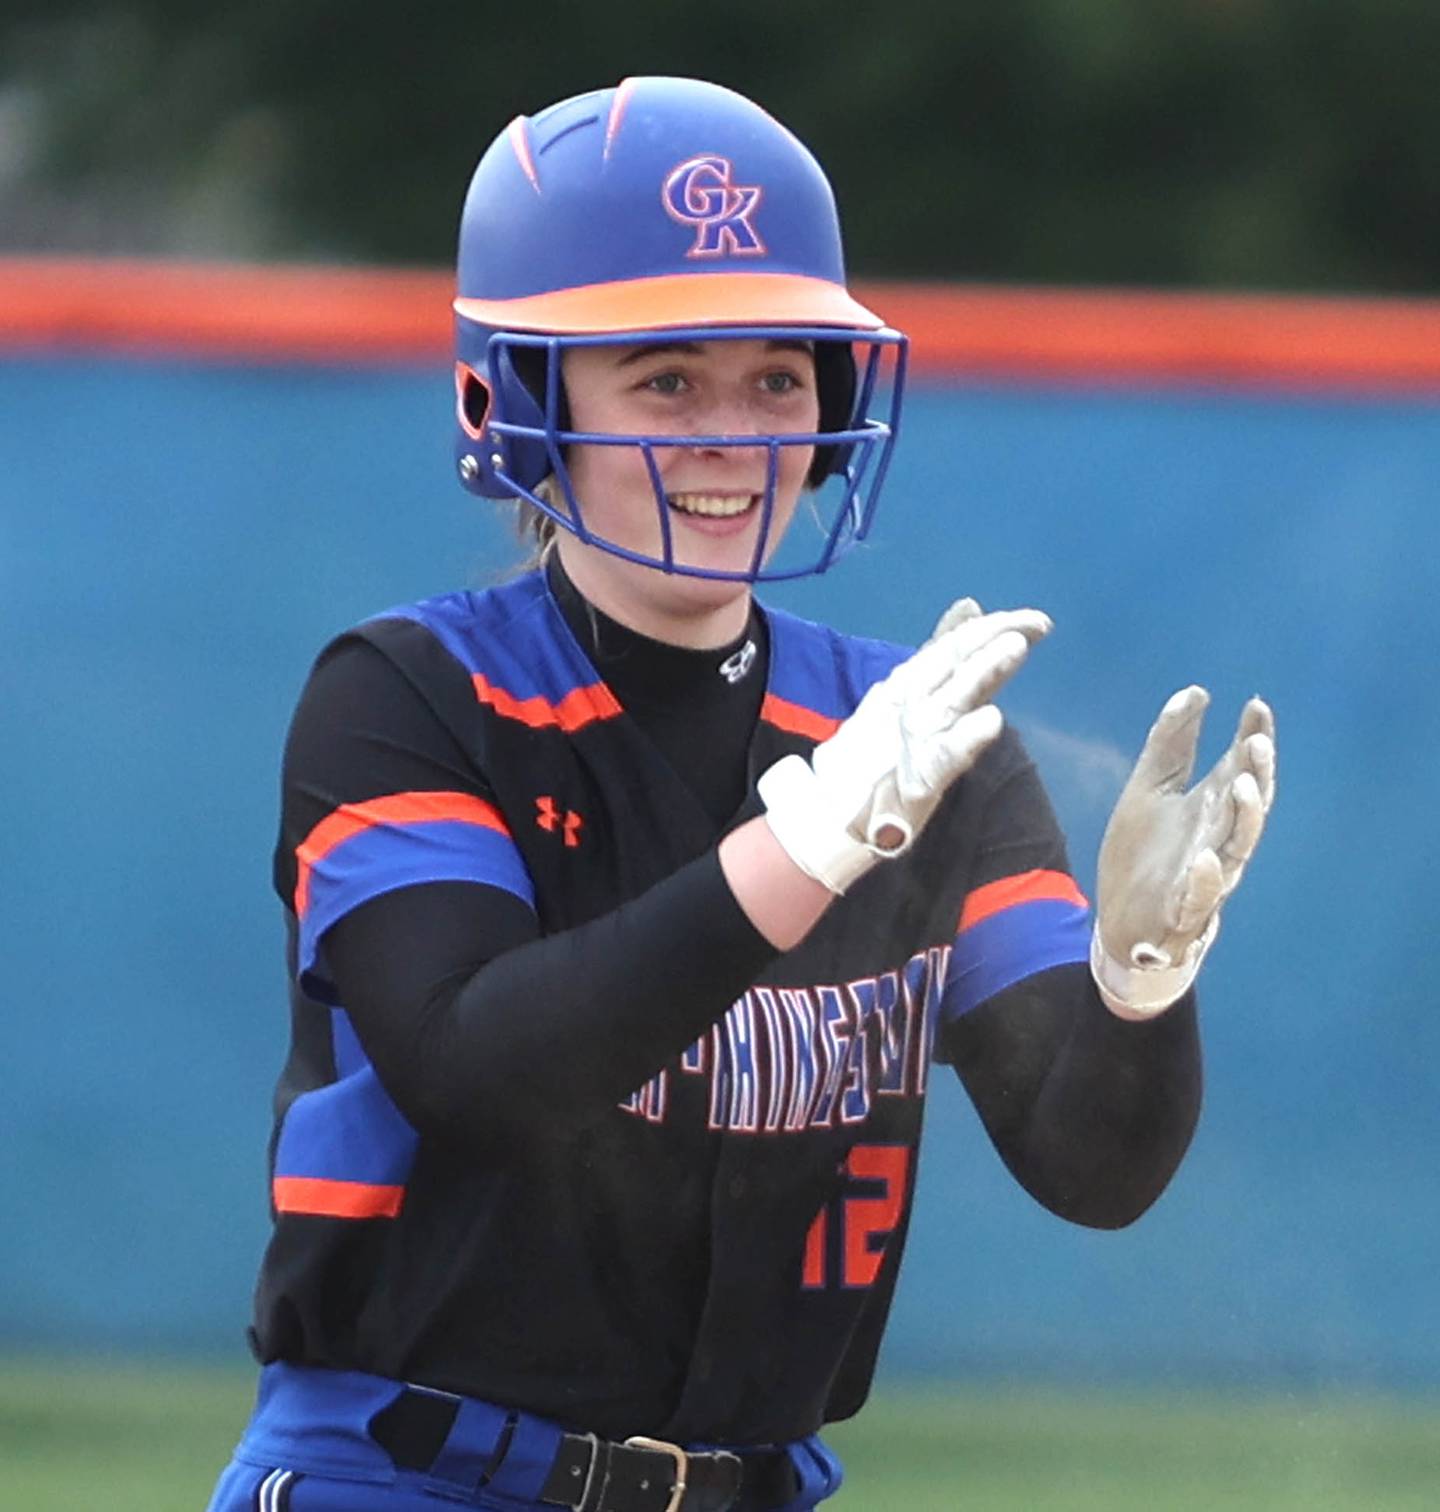 Genoa-Kingston's Christine Venditti gives herself a hand after hitting a double during their game against Winnebago Thursday, April 28, 2022, at Genoa-Kingston High School.